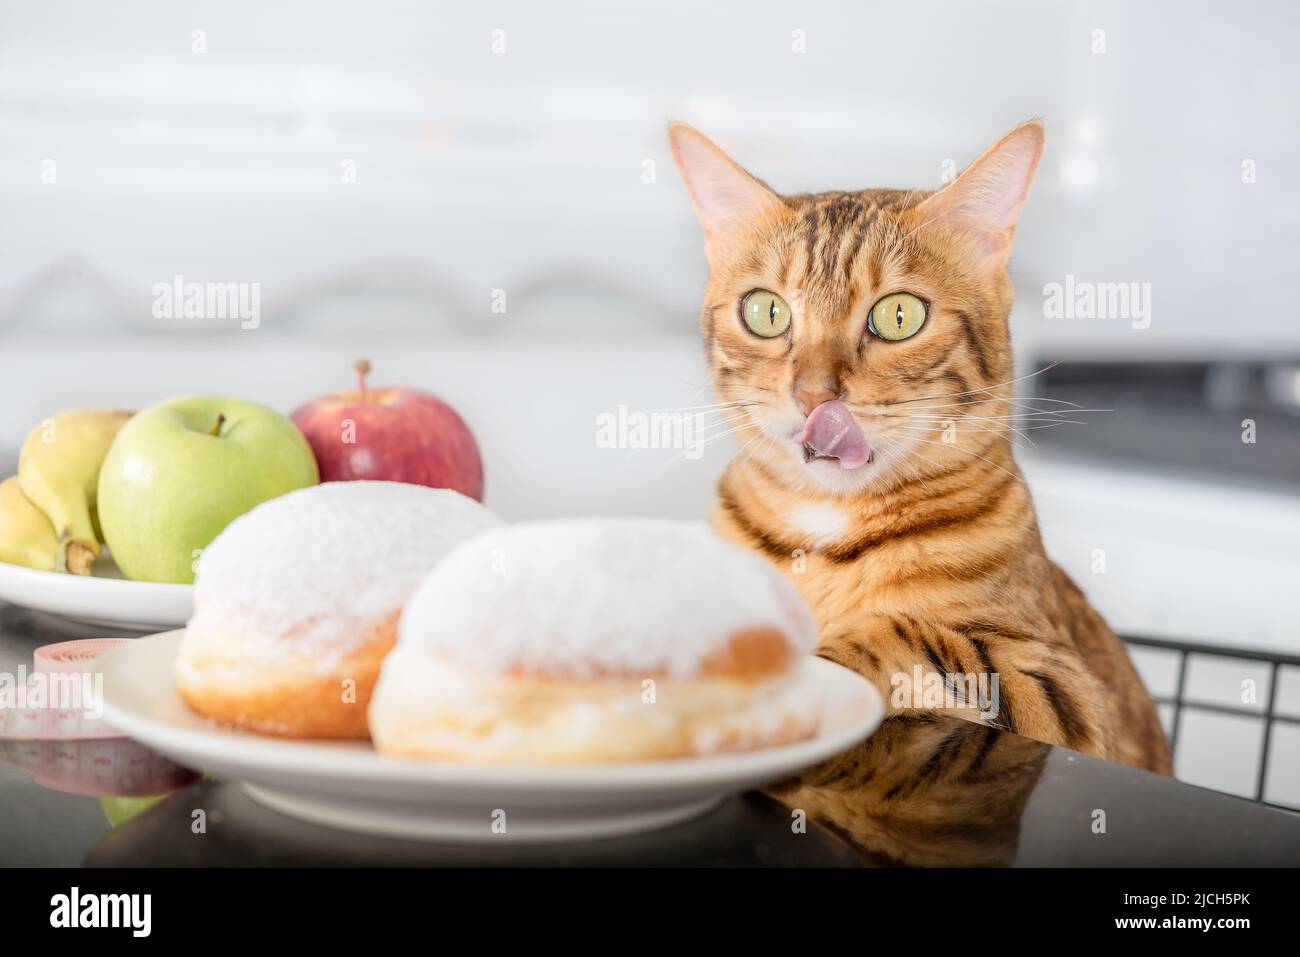 The cat licks his lips while looking at the donuts. The choice between unhealthy and healthy food. Stock Photo